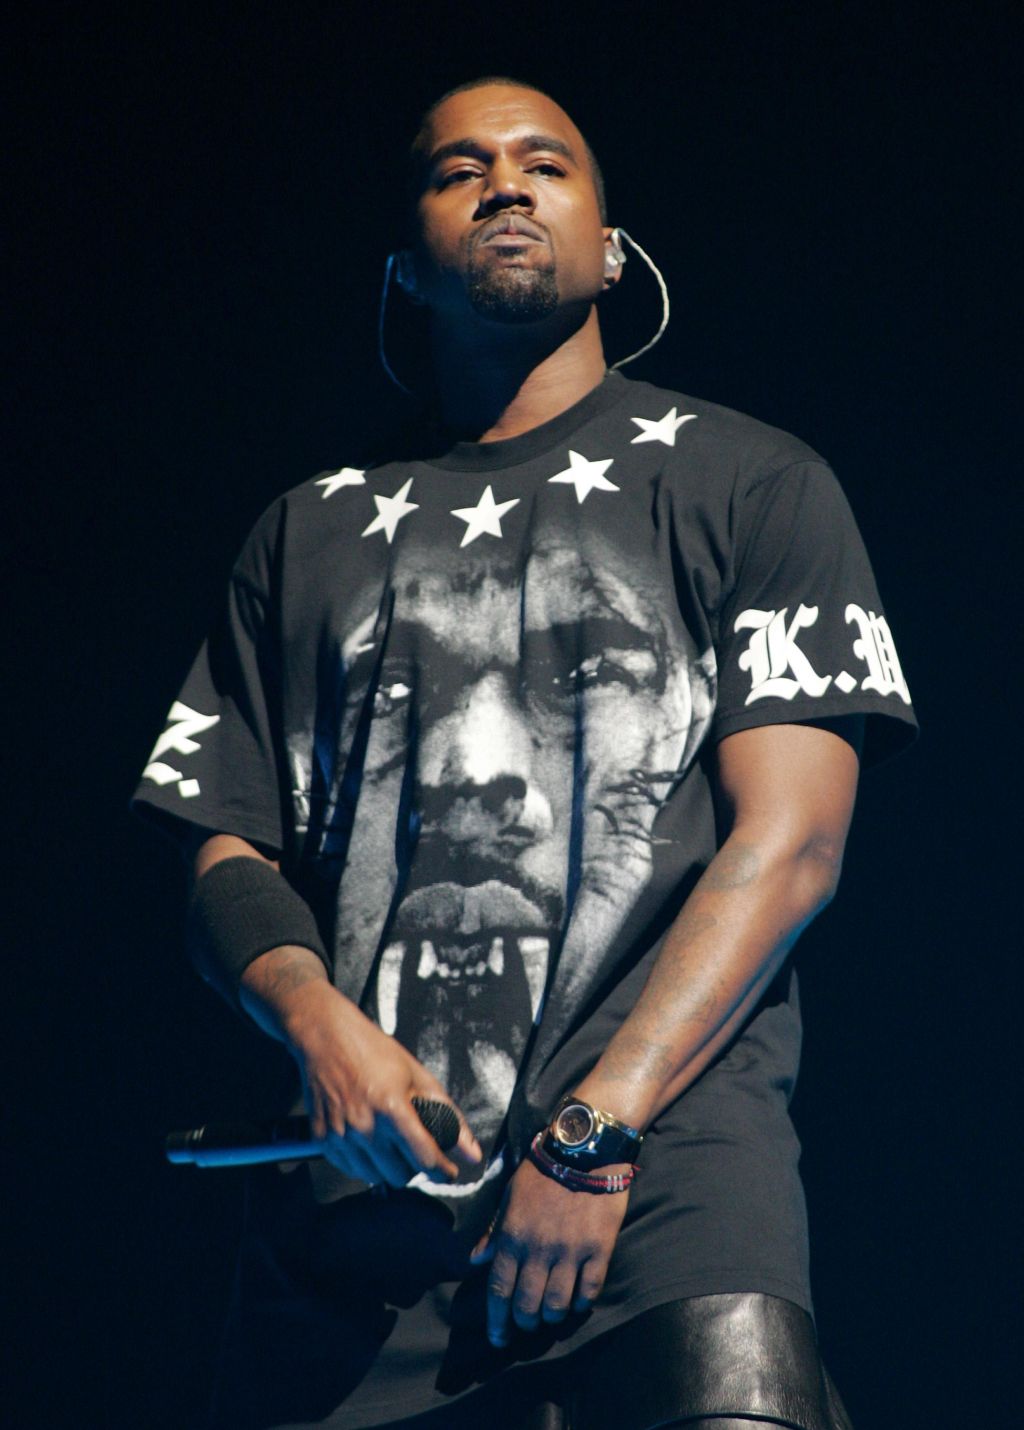 Jay-Z And Kanye West 'Watch The Throne' Tour In Kansas City